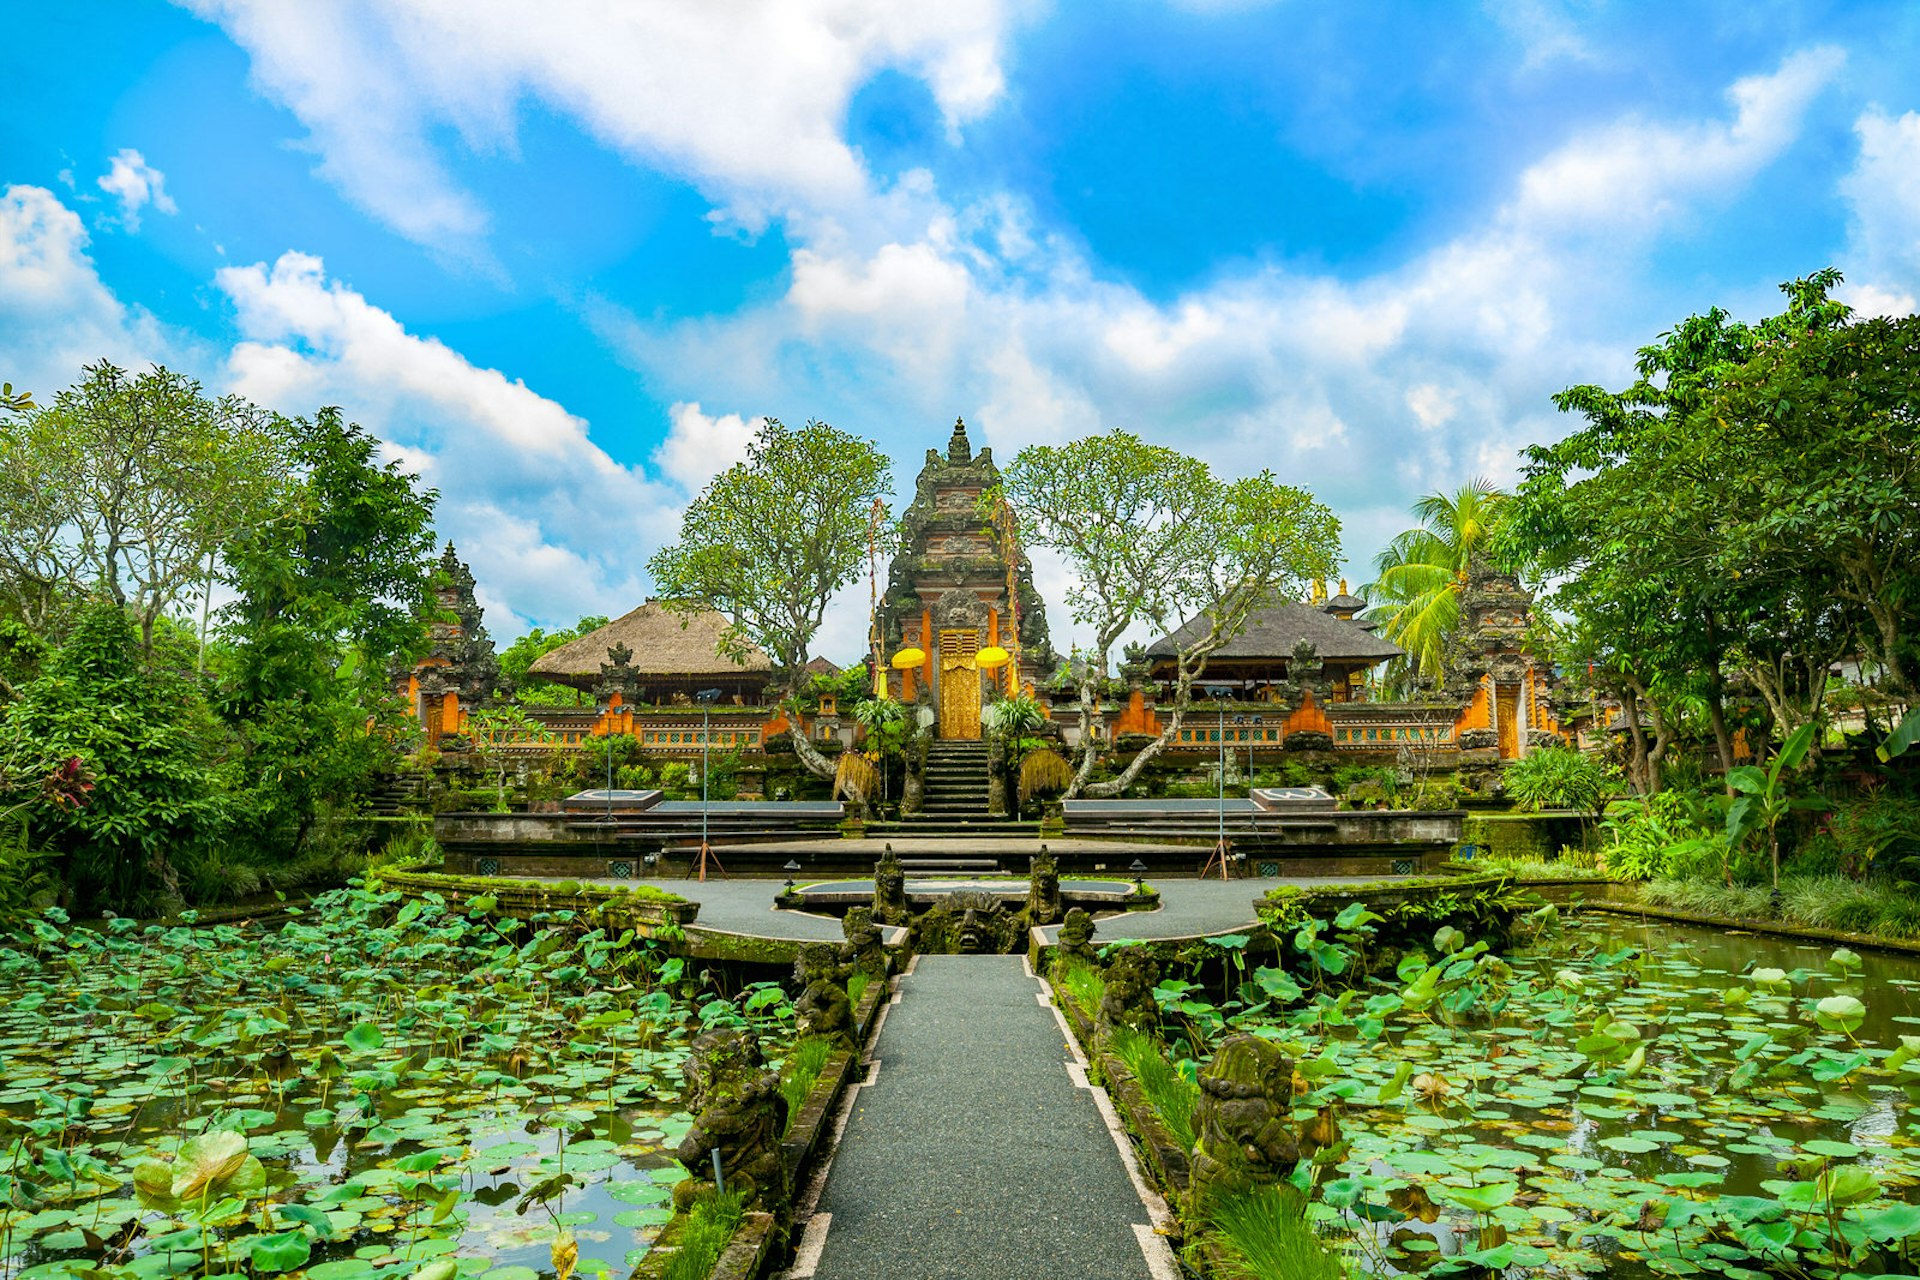 A paved path leads across a lotus covered pond in front of the temple of Pura Taman Saraswati in Ubud, Bali